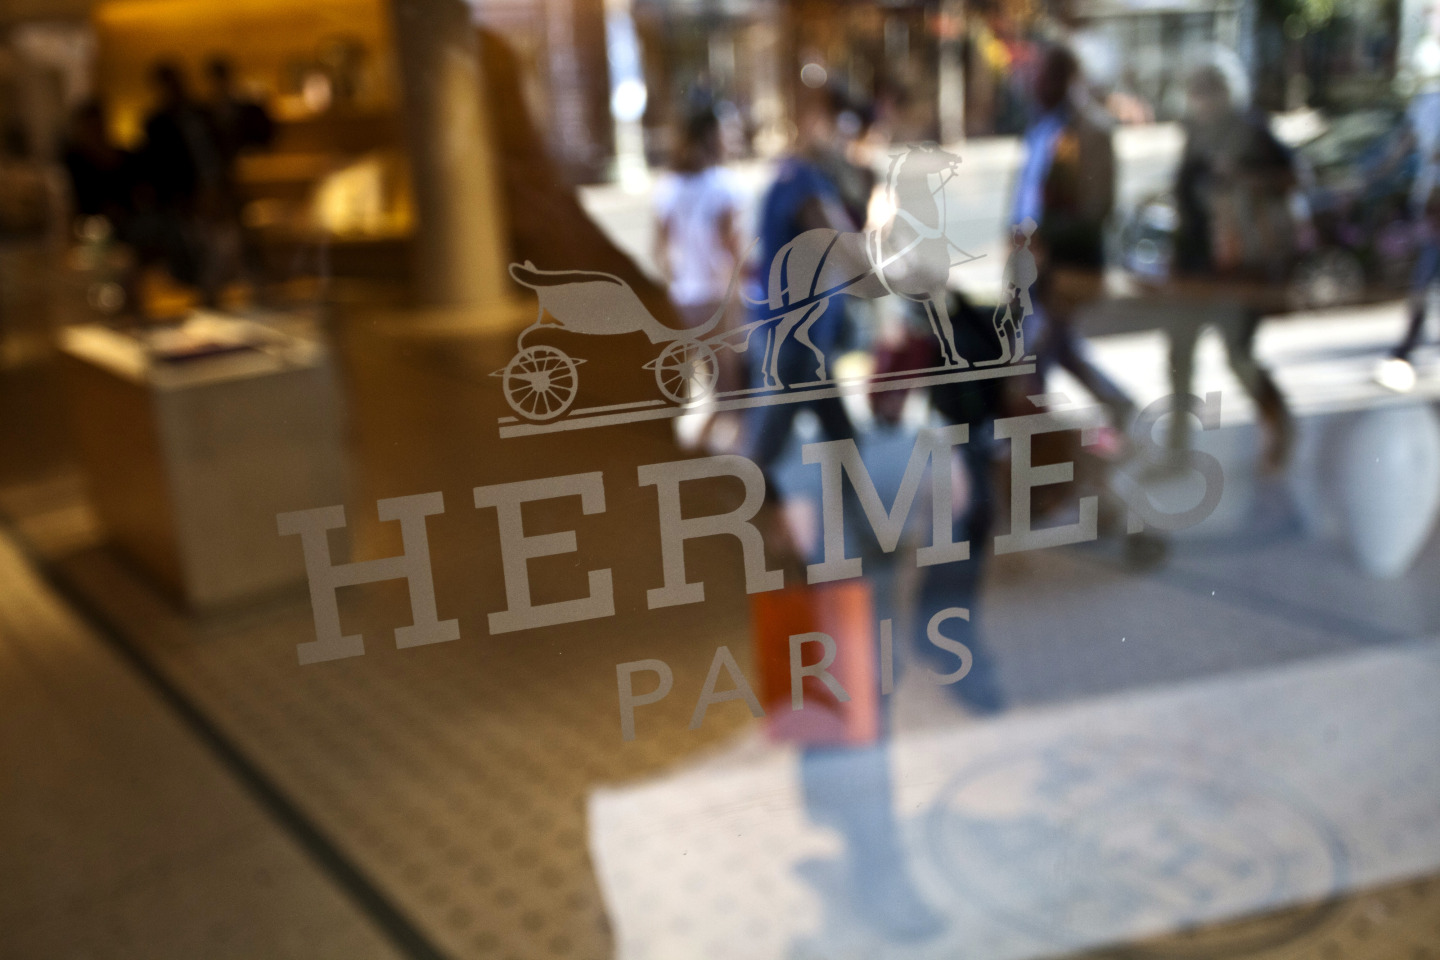 For sale: a rare Hermes Kelly bag for more than $500,000